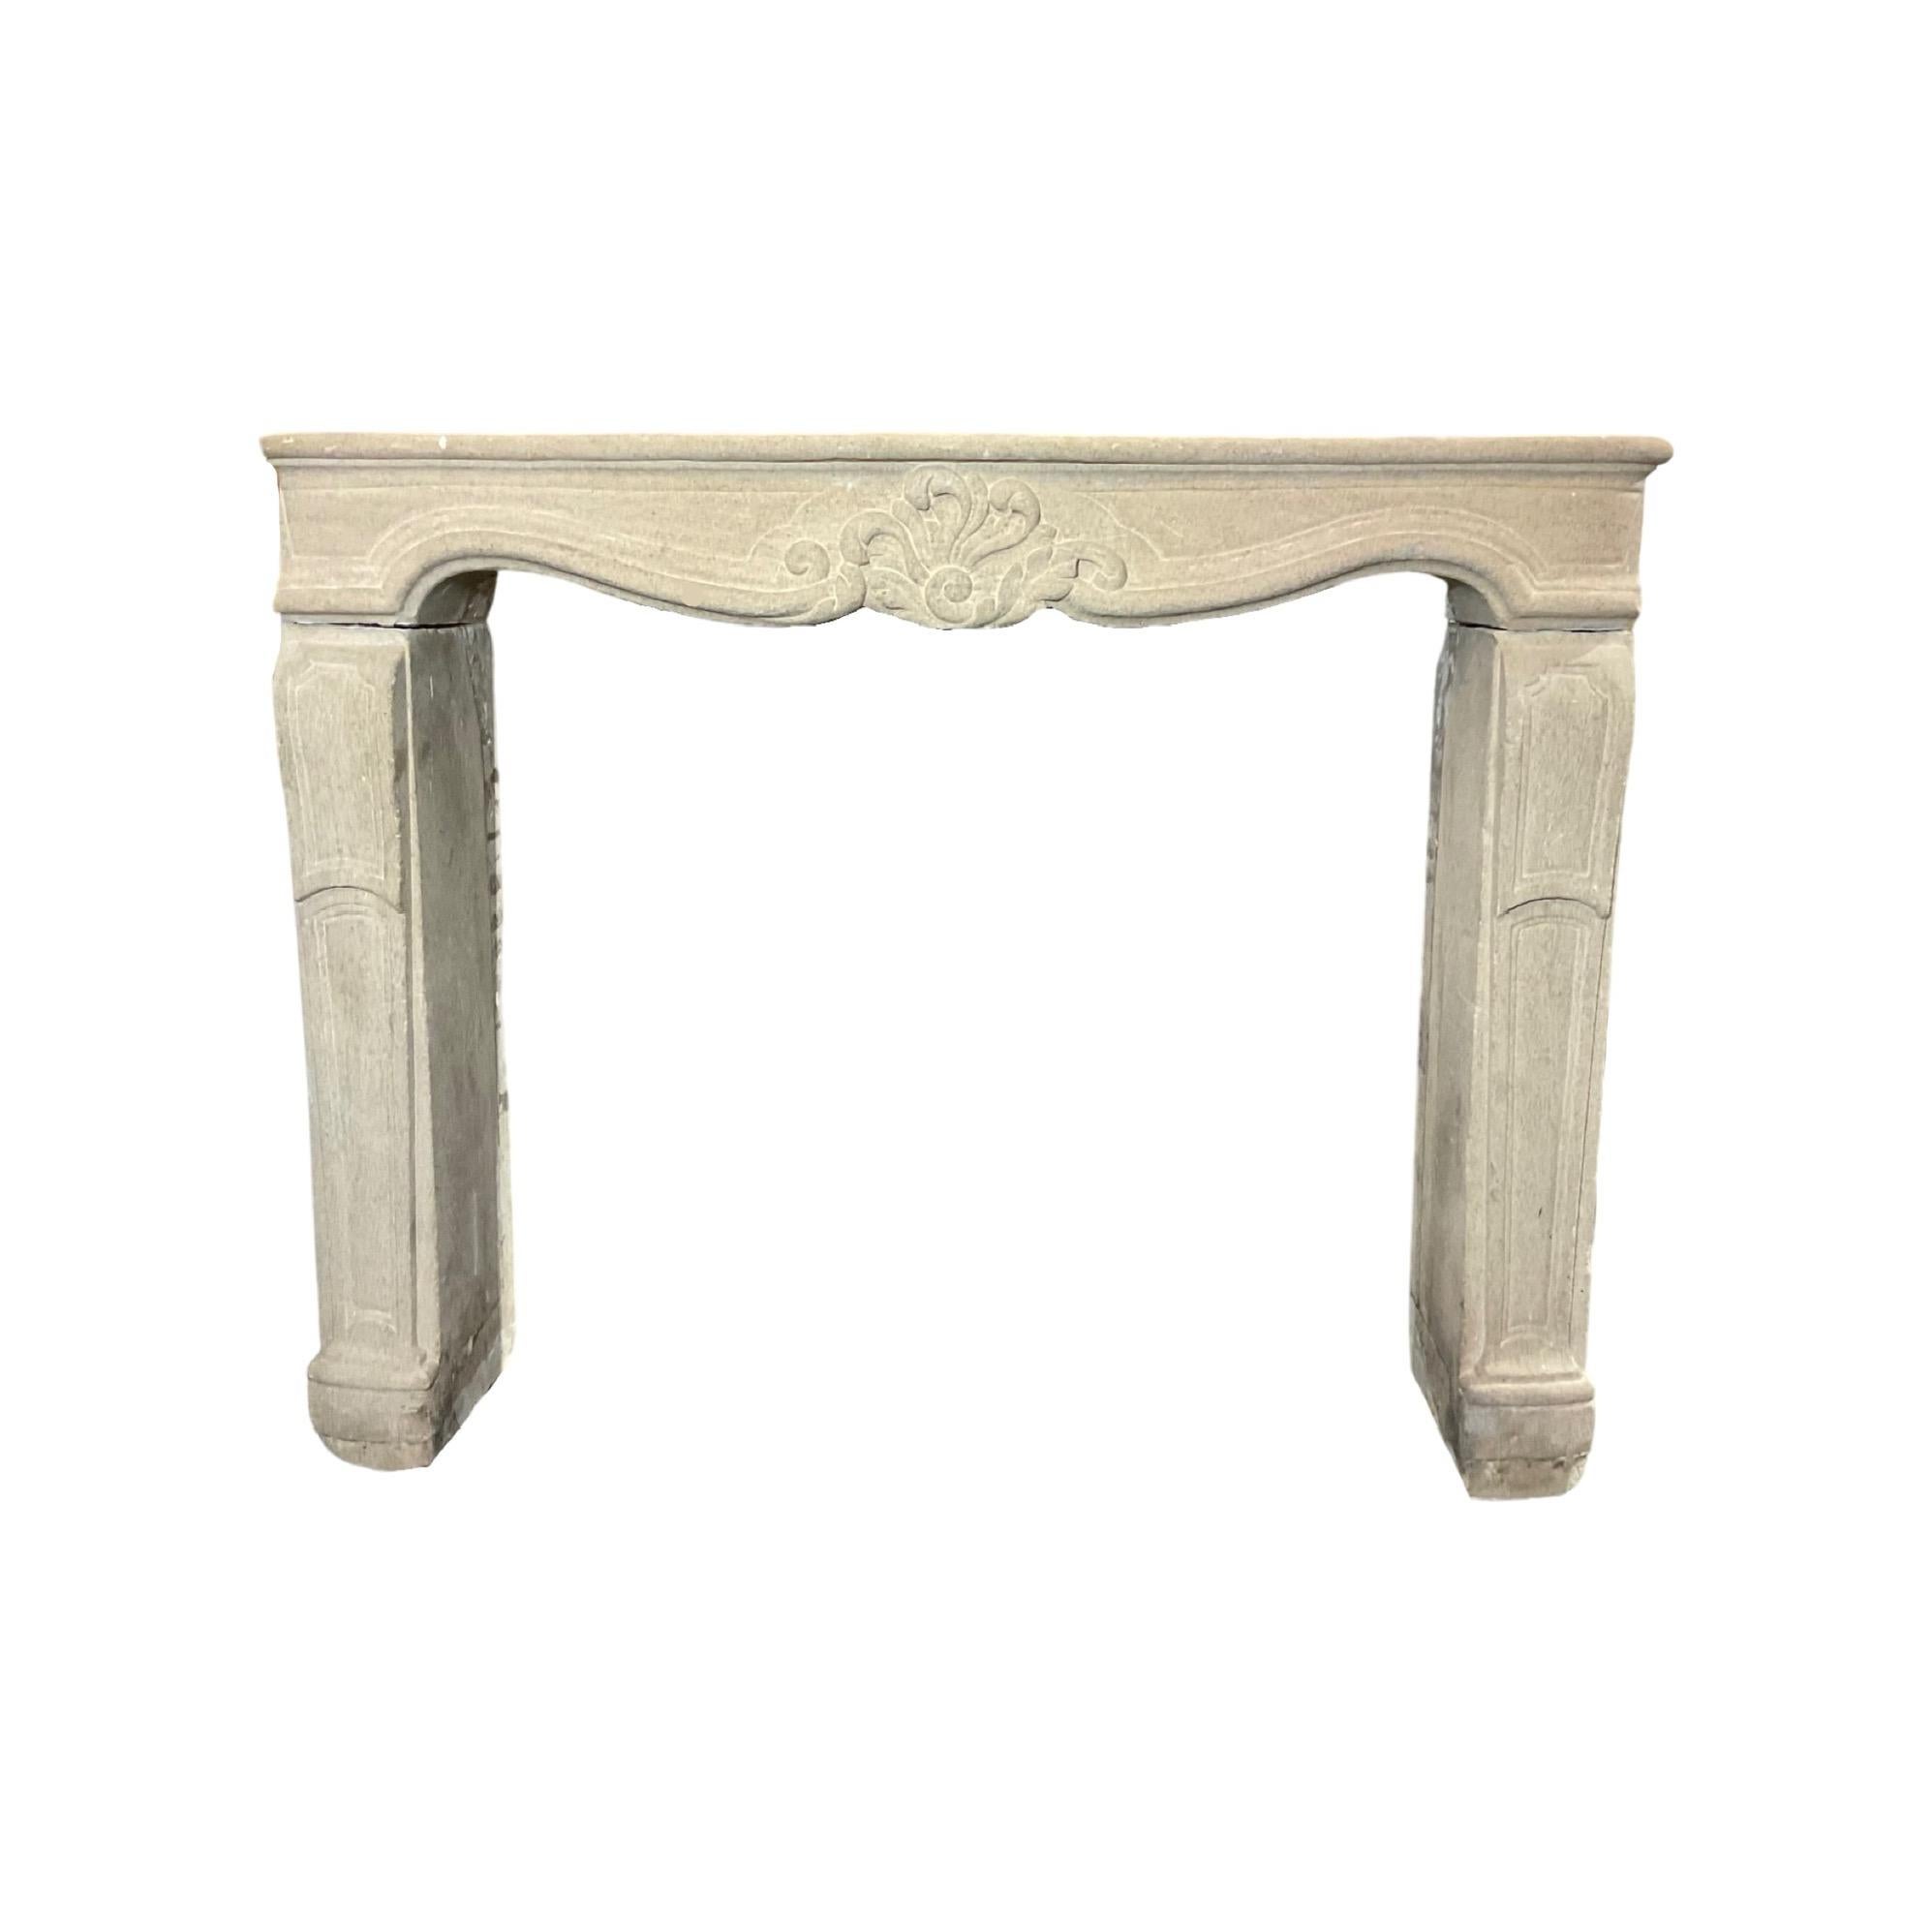 This hand-carved French Limestone Mantel from the 1860s is a beautiful addition to any home. Skillfully crafted with Louis XVI style carvings, this piece of history brings a regal feel. From France, it's an exquisite antiquity worthy of display or